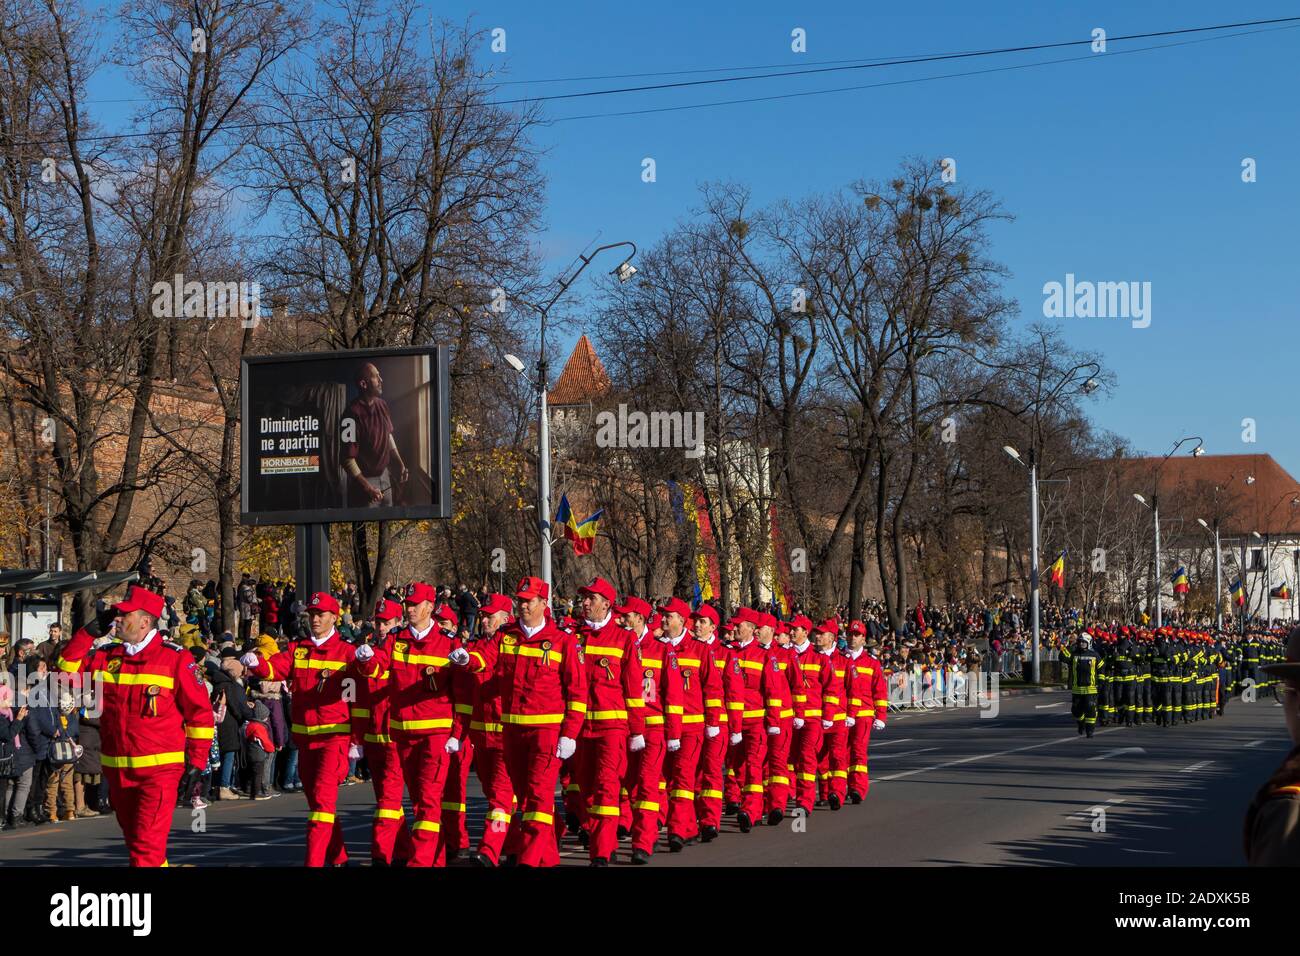 The annual military parade of the Romanian Armed Forces. Romanian Army Parade, December 1, 2019 Stock Photo